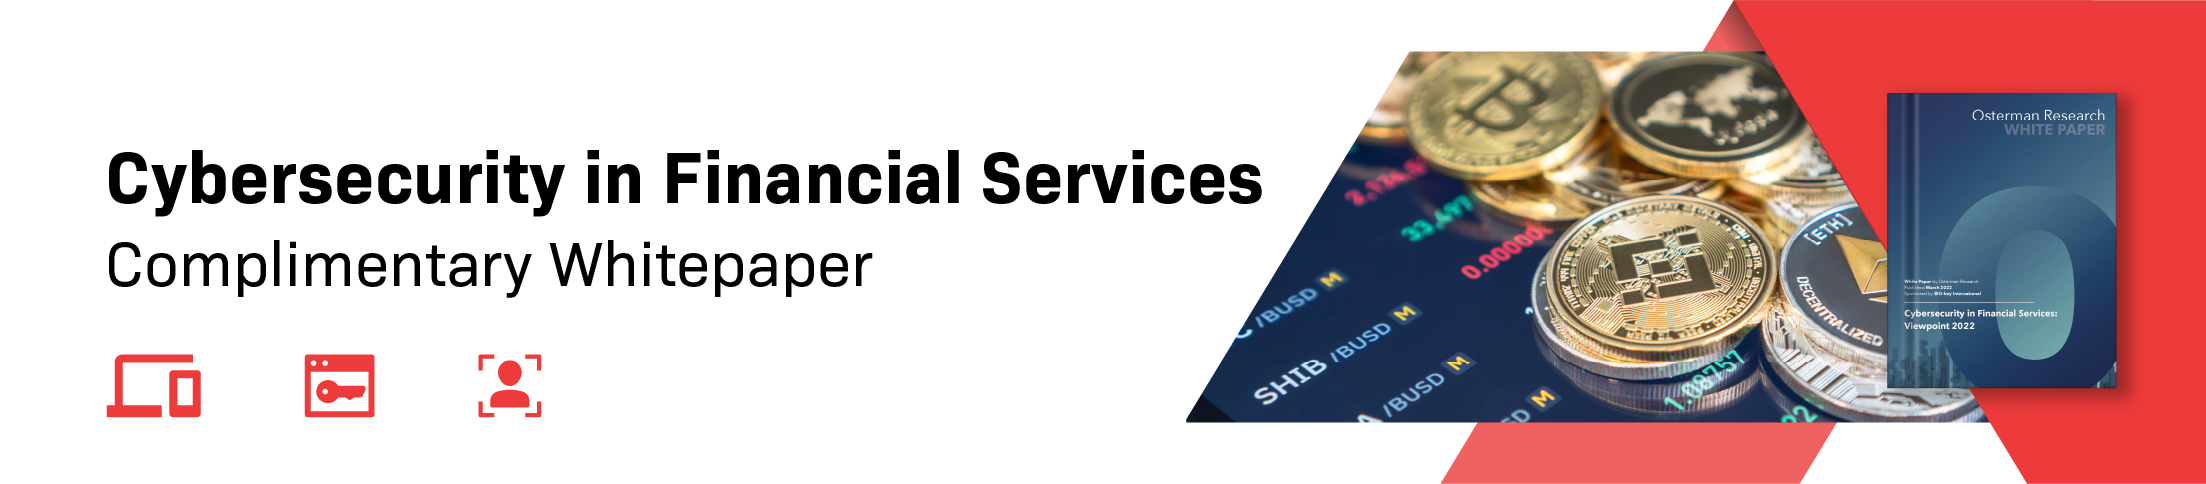 Cybersecurity in Financial Services whitepaper